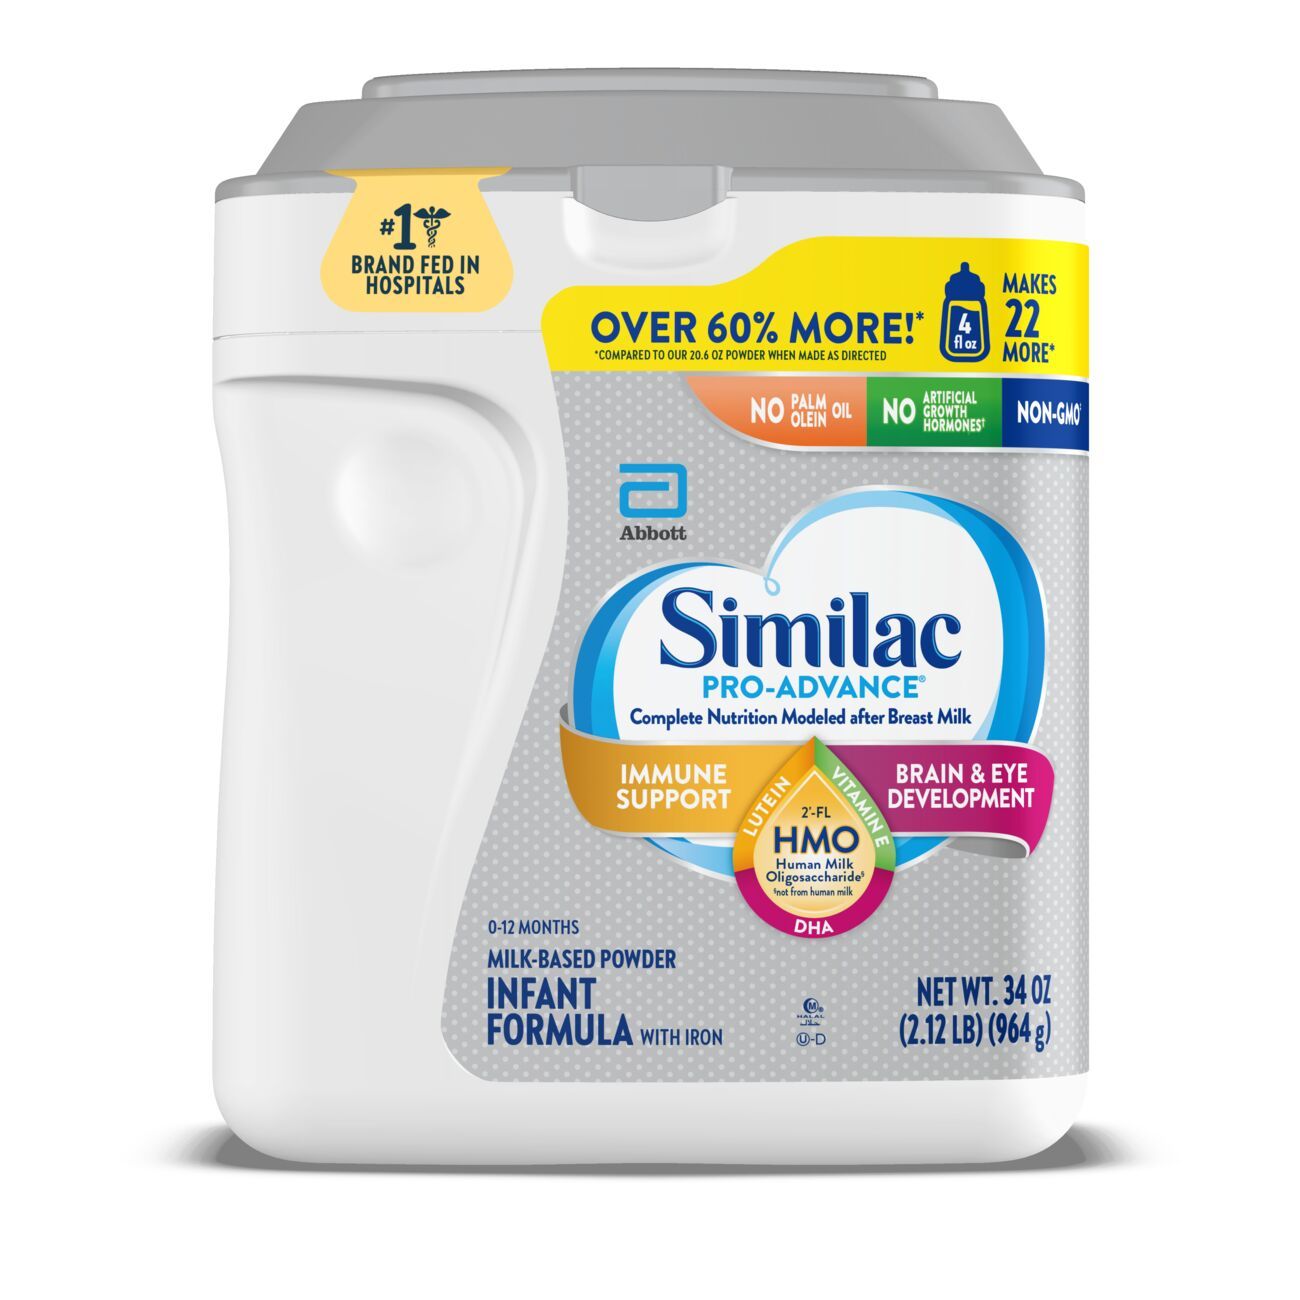 Similac Pro-Advance Powder Baby Formula, With 2′-FL HMO for Immune Support, 34-oz Value Tub - image 1 of 9